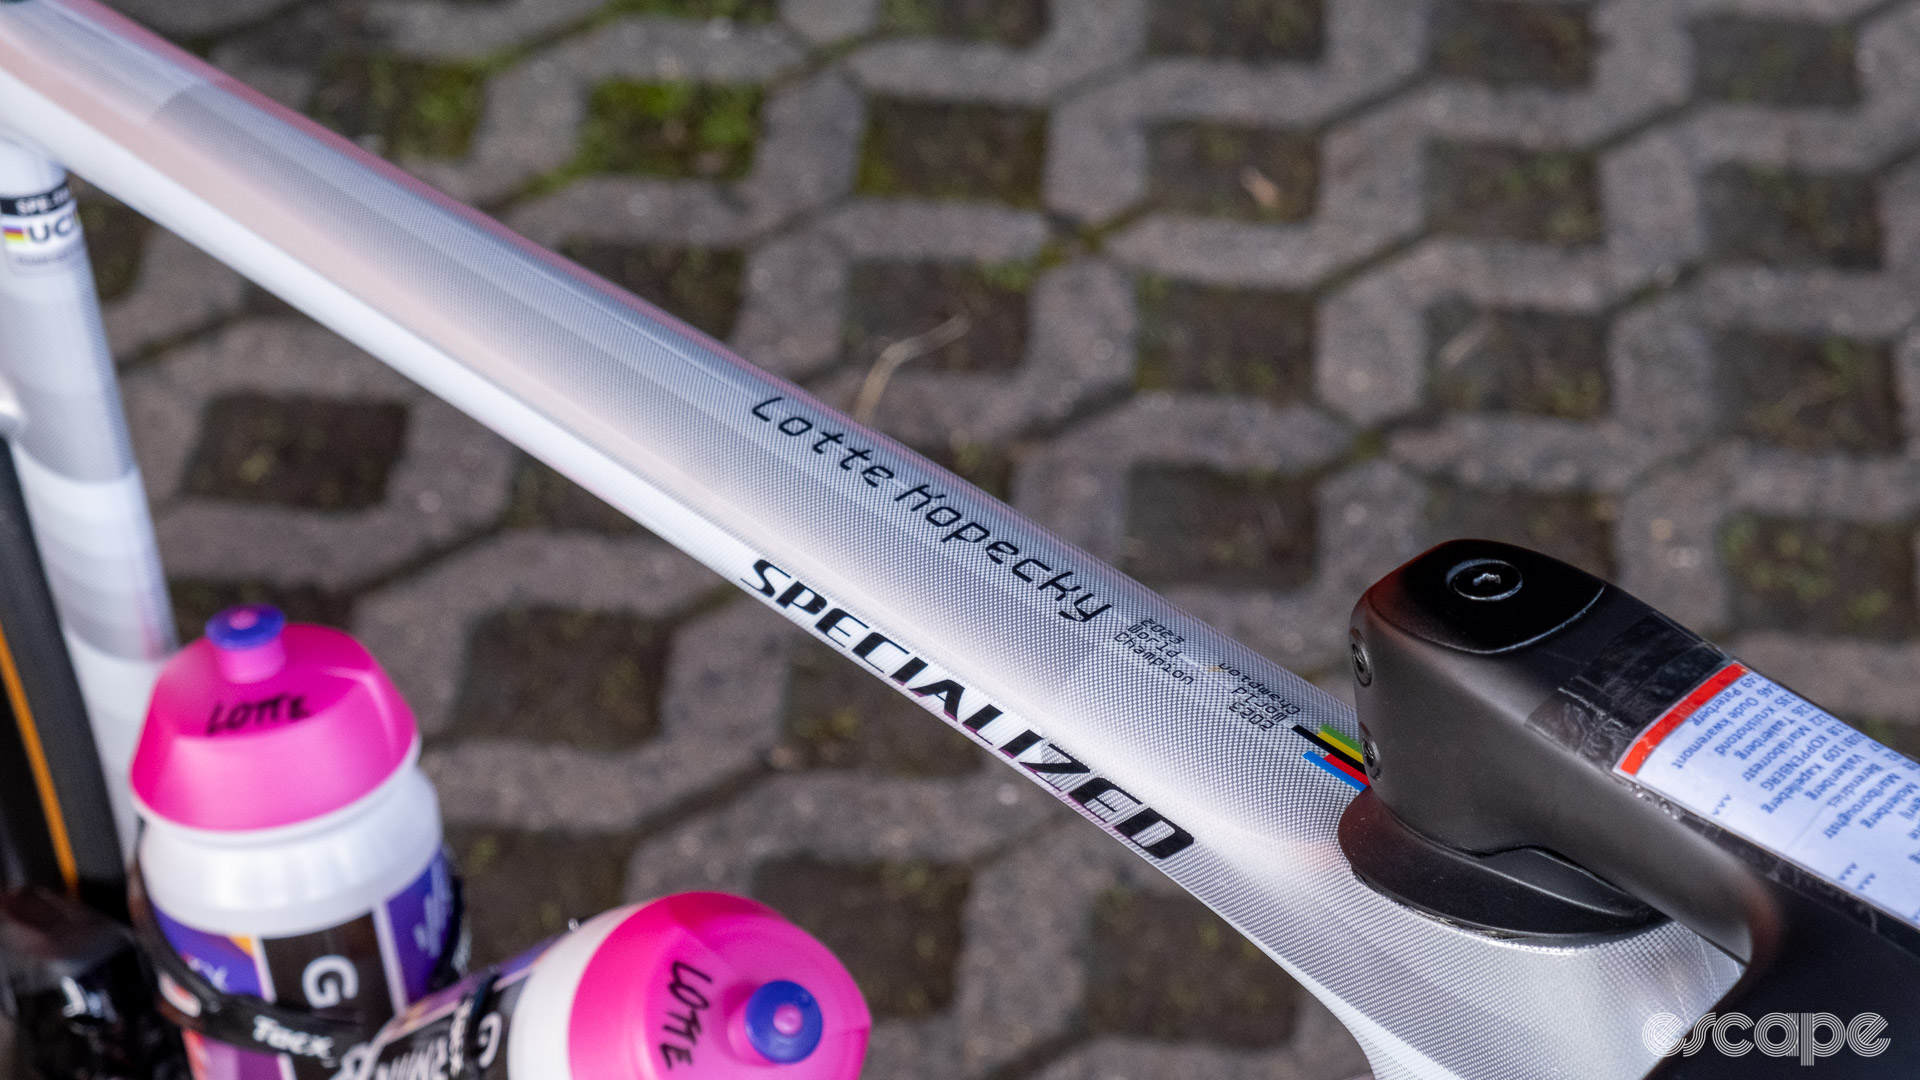 The image shows the top tube of Lotte Kopecky's bike which has her name in large text and th words "2023 World Chmapion" written along side a small rainbow bands decal.